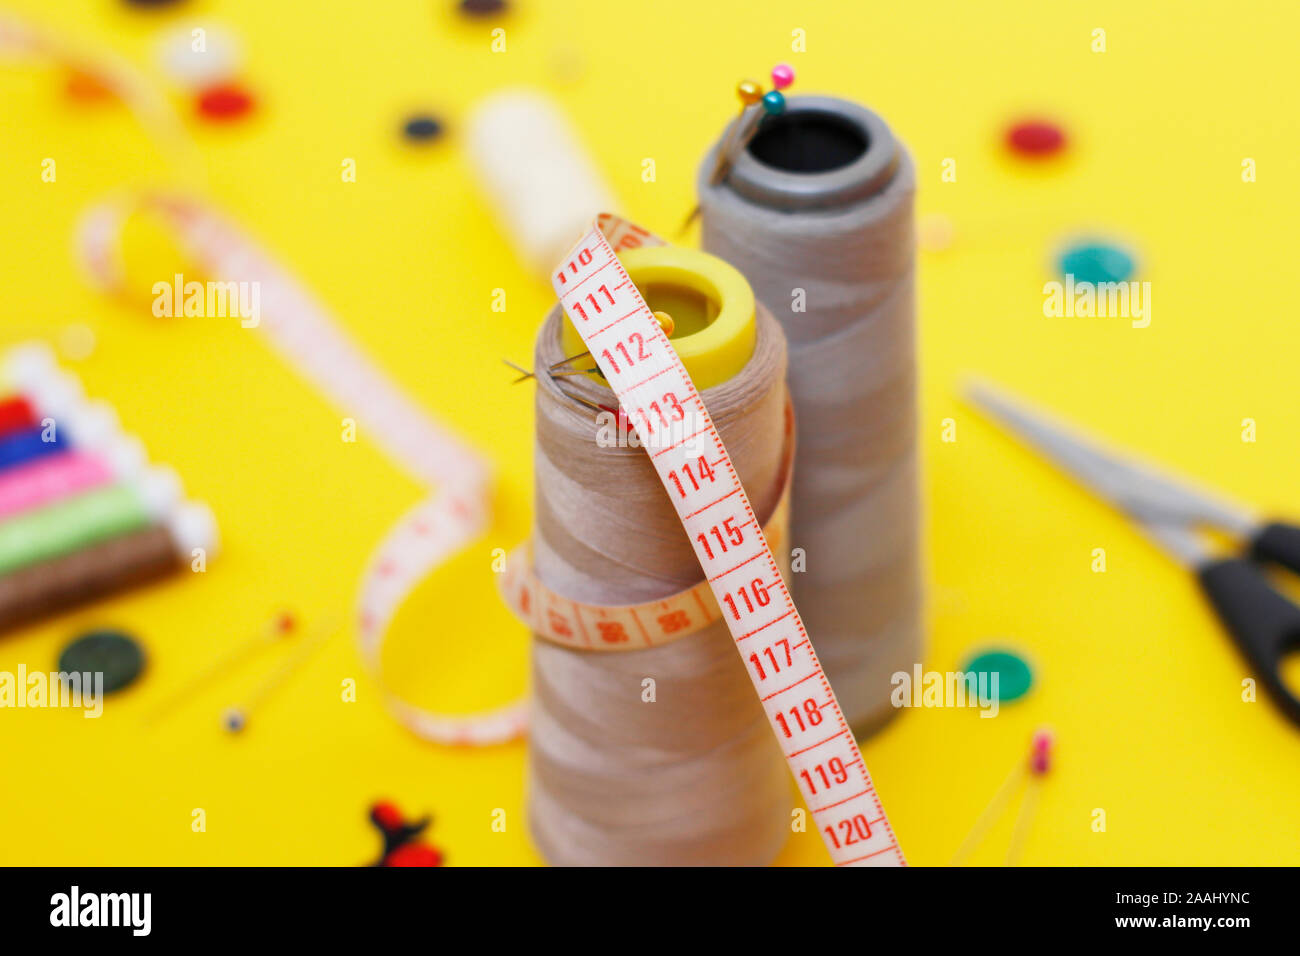 Sewing buttons and threads on a yellow background. Needlework concept. A lot of multi-colored little bobbins of sewing thread on a yellow background. Stock Photo